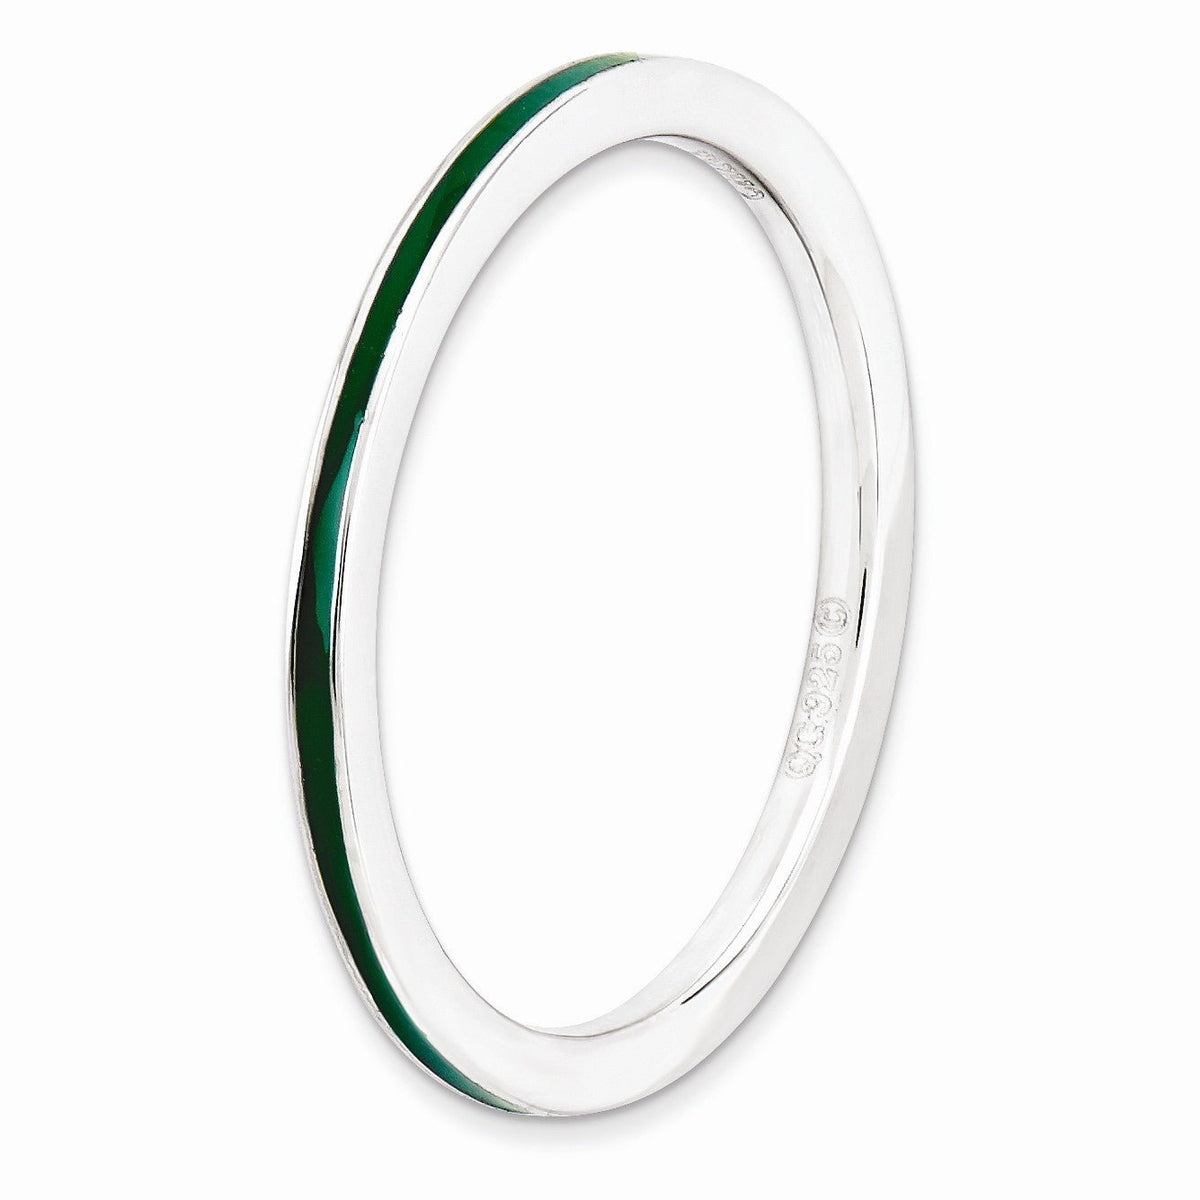 Alternate view of the 1.5mm Sterling Silver Stackable Green Enameled Band by The Black Bow Jewelry Co.